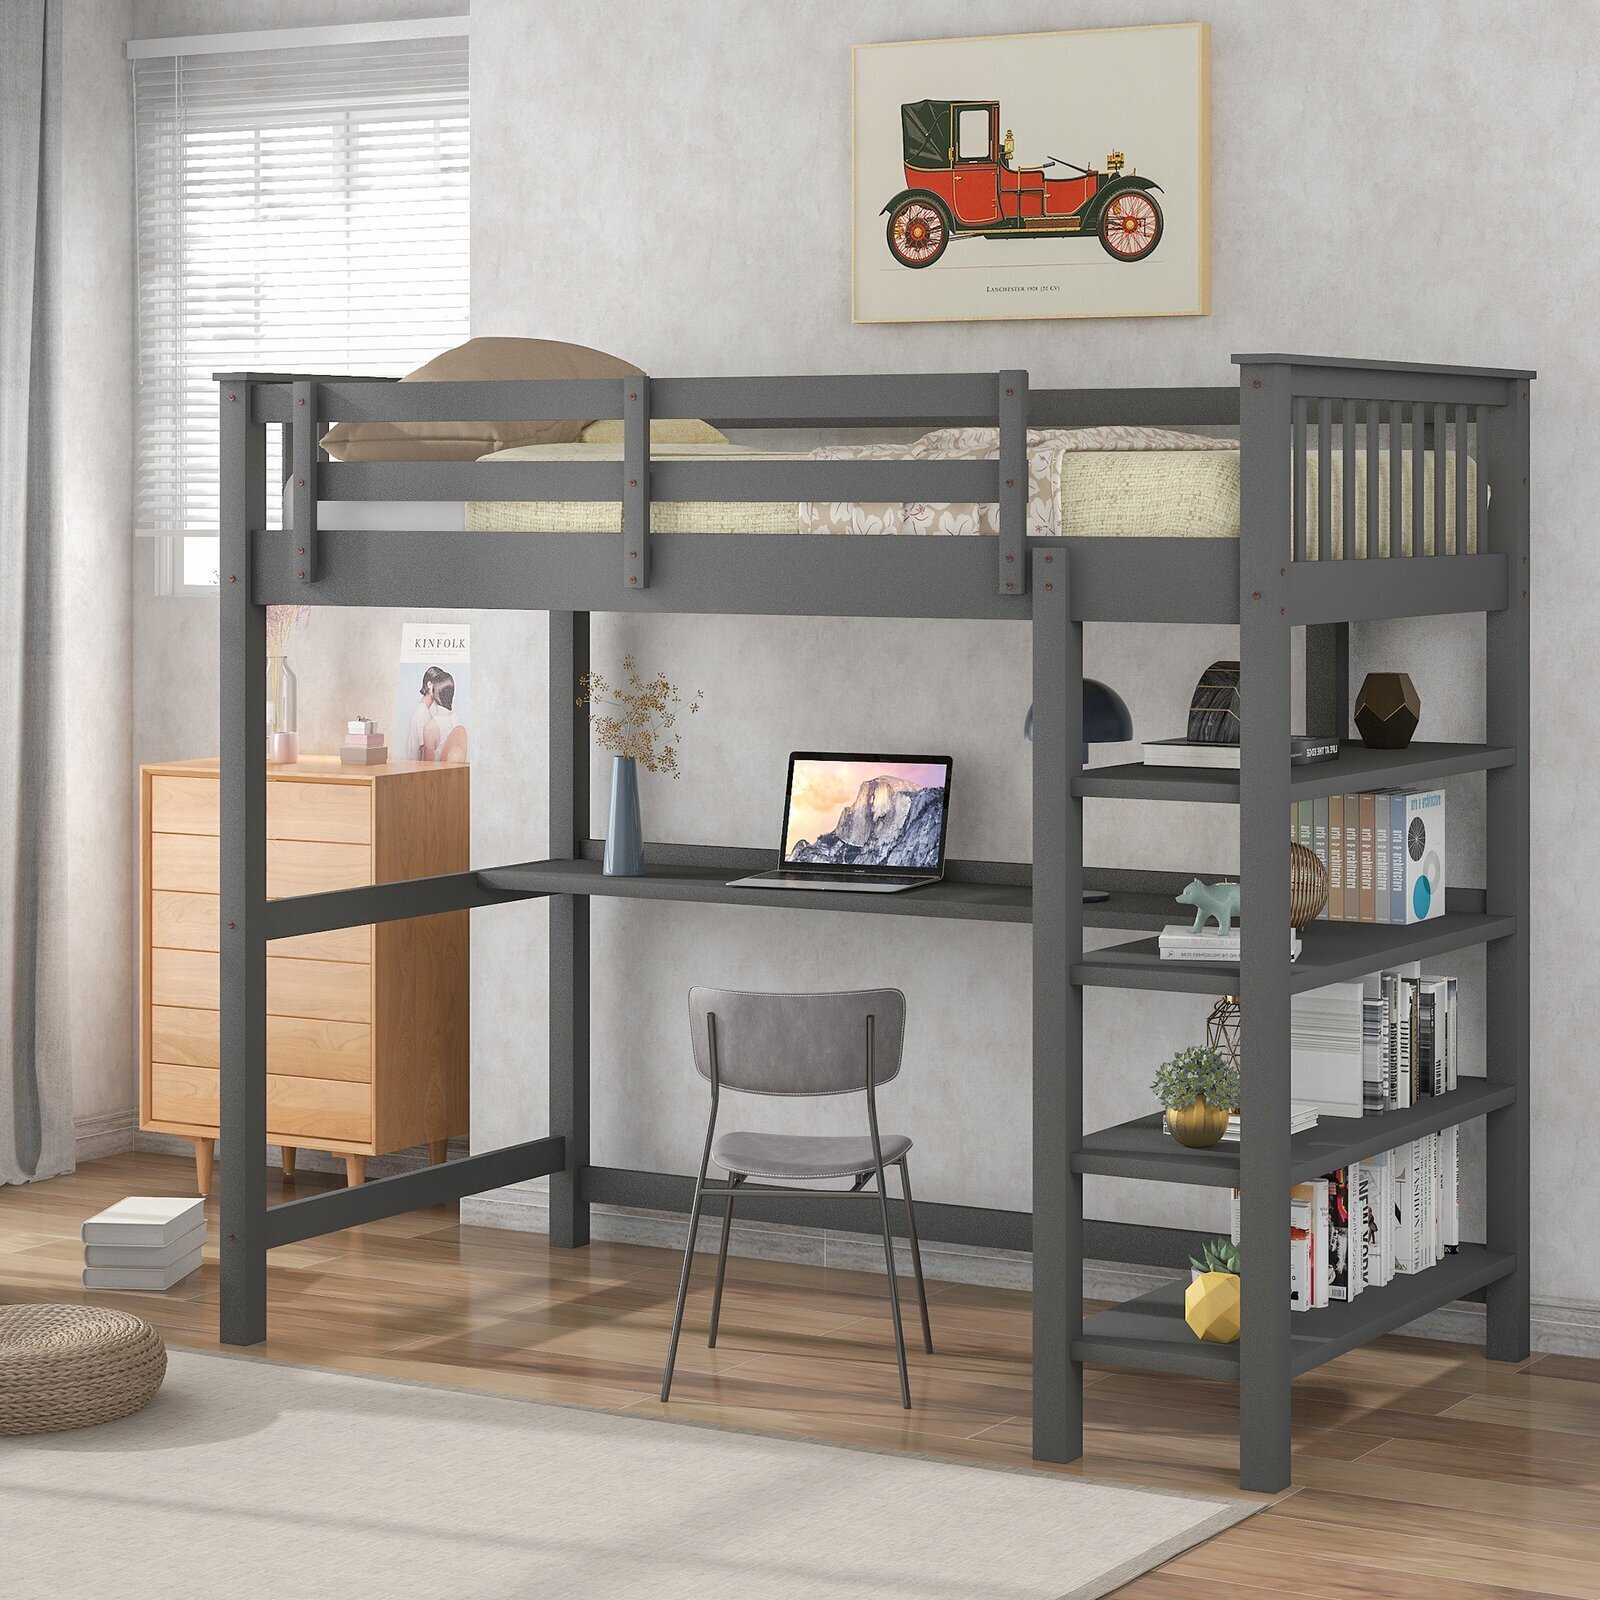 Wooden Bunk Bed with Open Bookcase